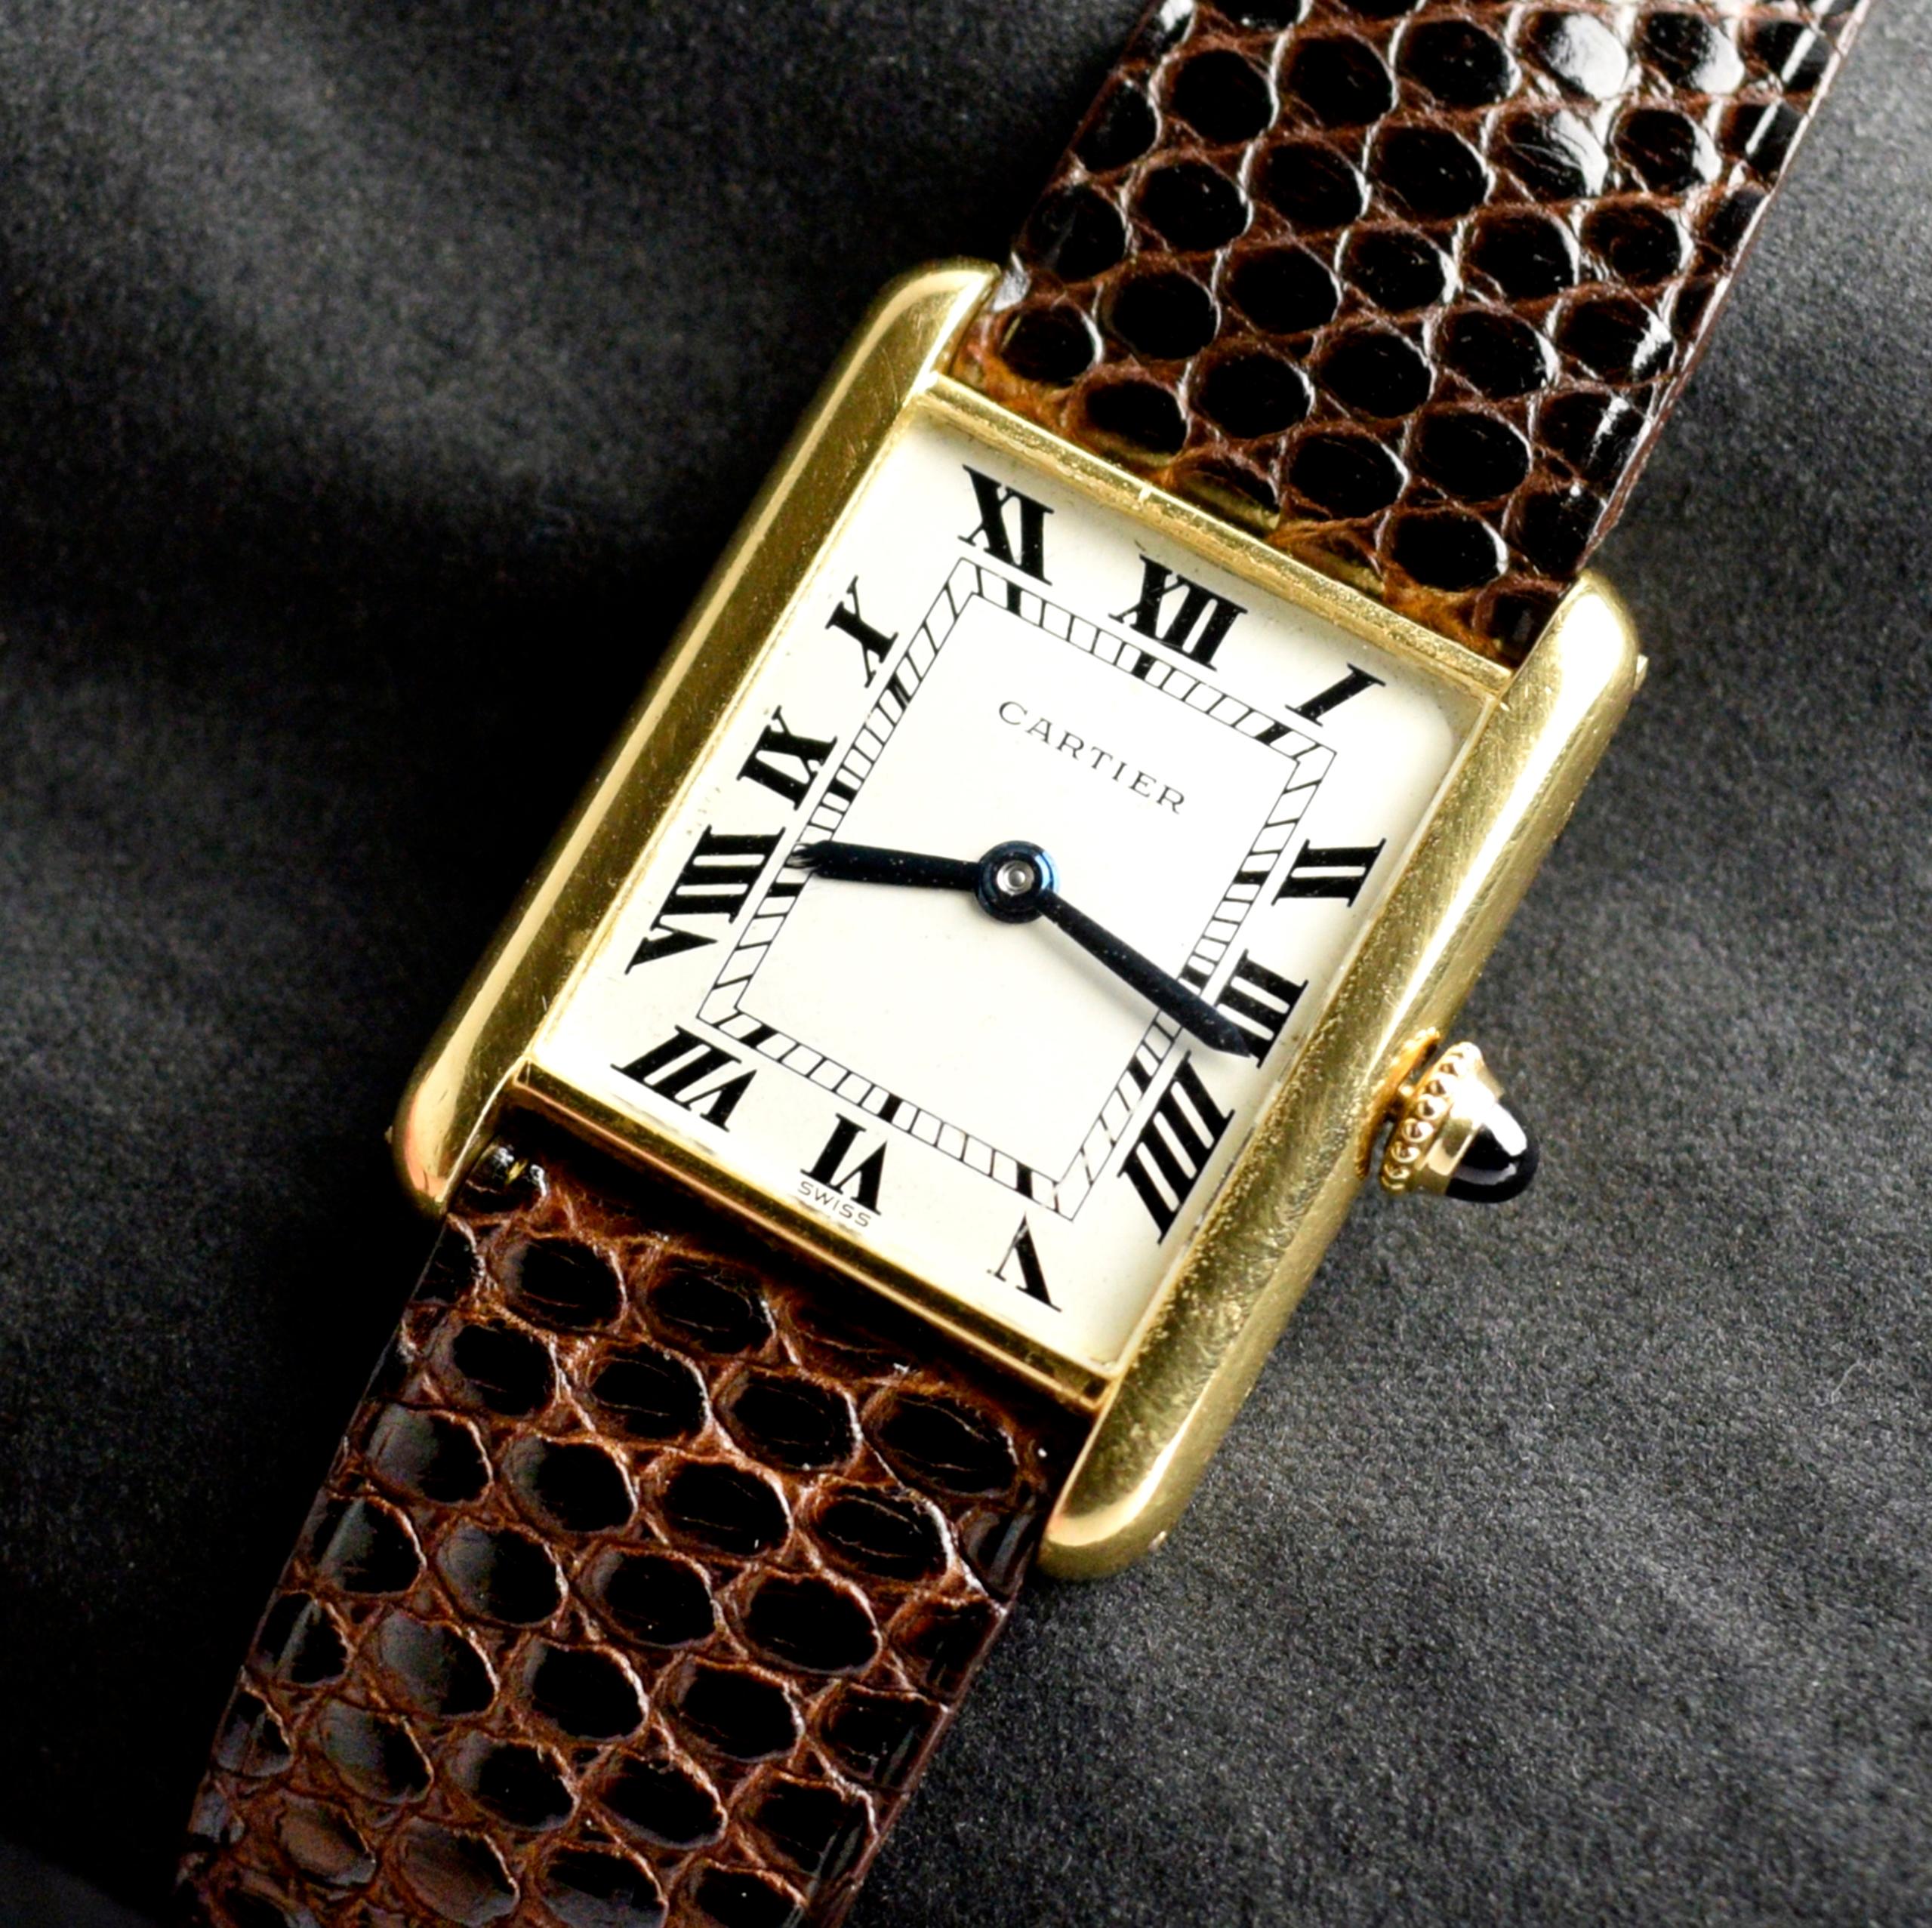 Brand: Cartier
Model: Tank Louis
Year: 1970’s
Serial Number: 13xxxx
Reference: C03808

The Tank watch has been created in several variations over the years, and all those models share the same DNA from the dial with Roman numerals to a crown